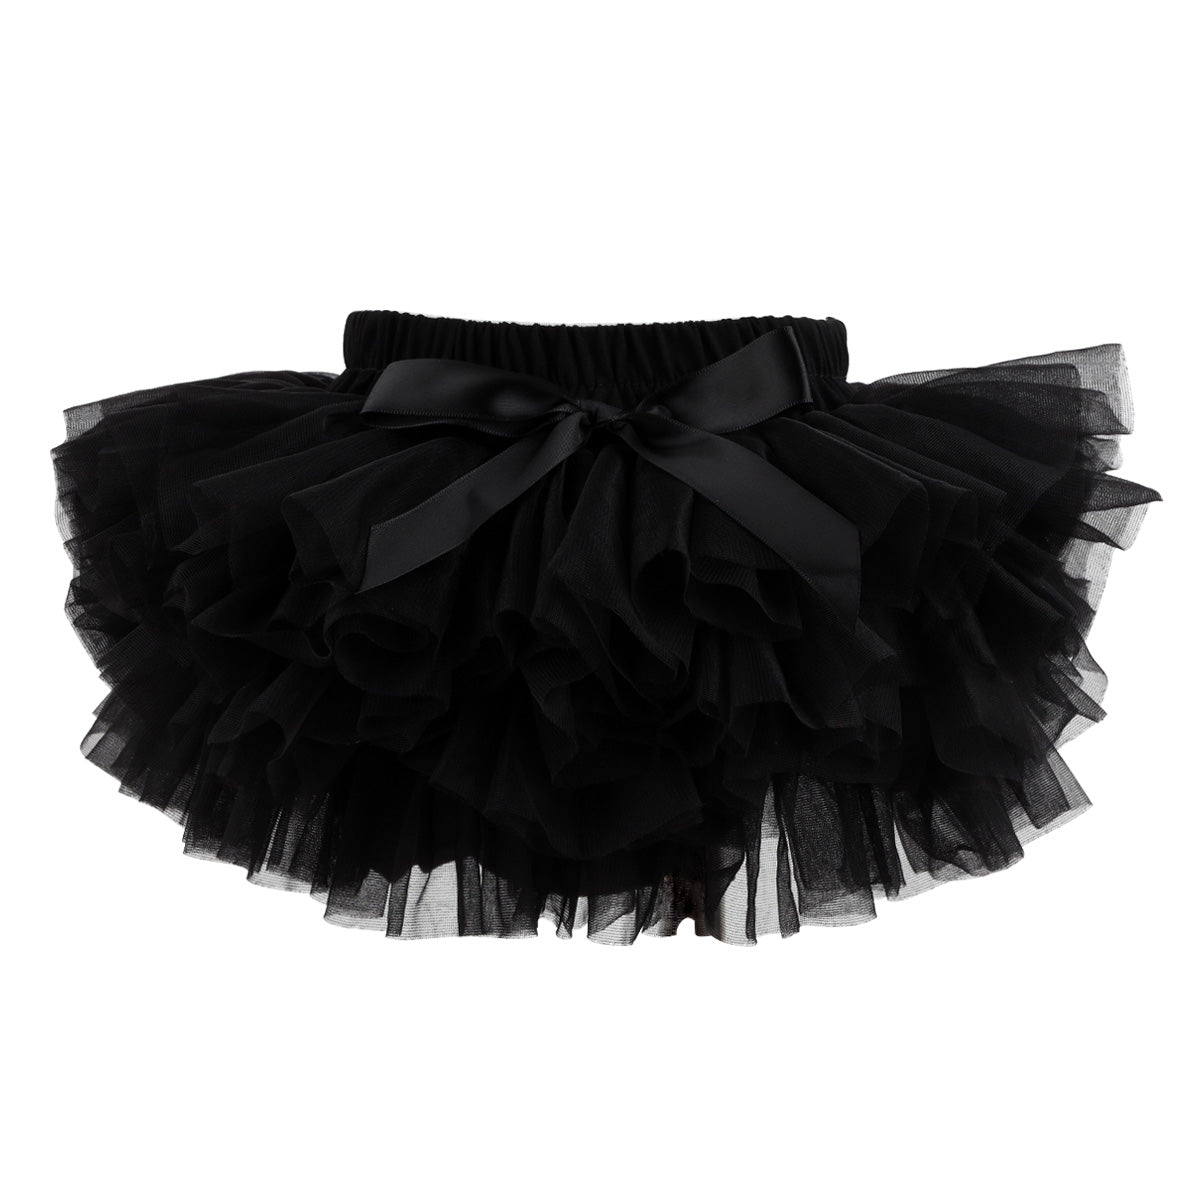 Baby girls fluffy soft and smooth TUTU skirt with diaper cover